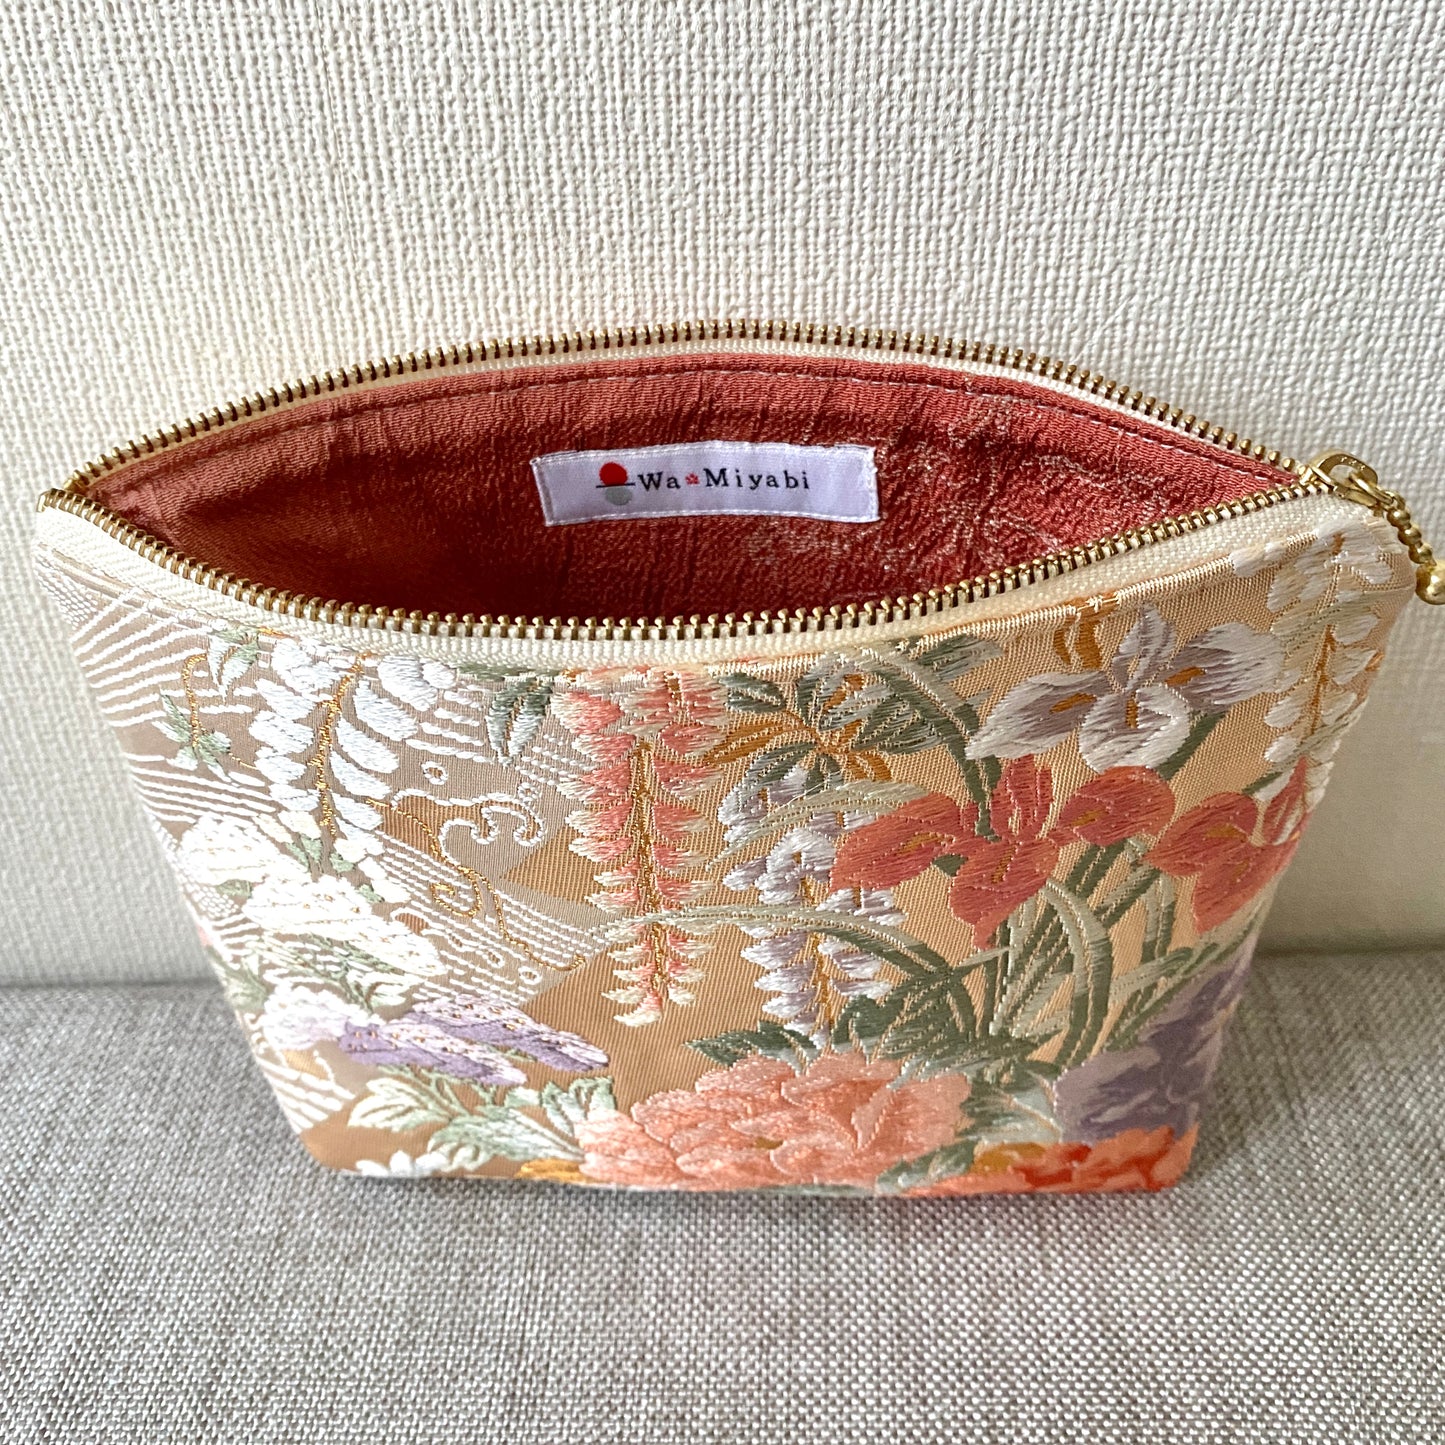 Small Silk Obi pouch, Handcrafted, Upcycled, #3003